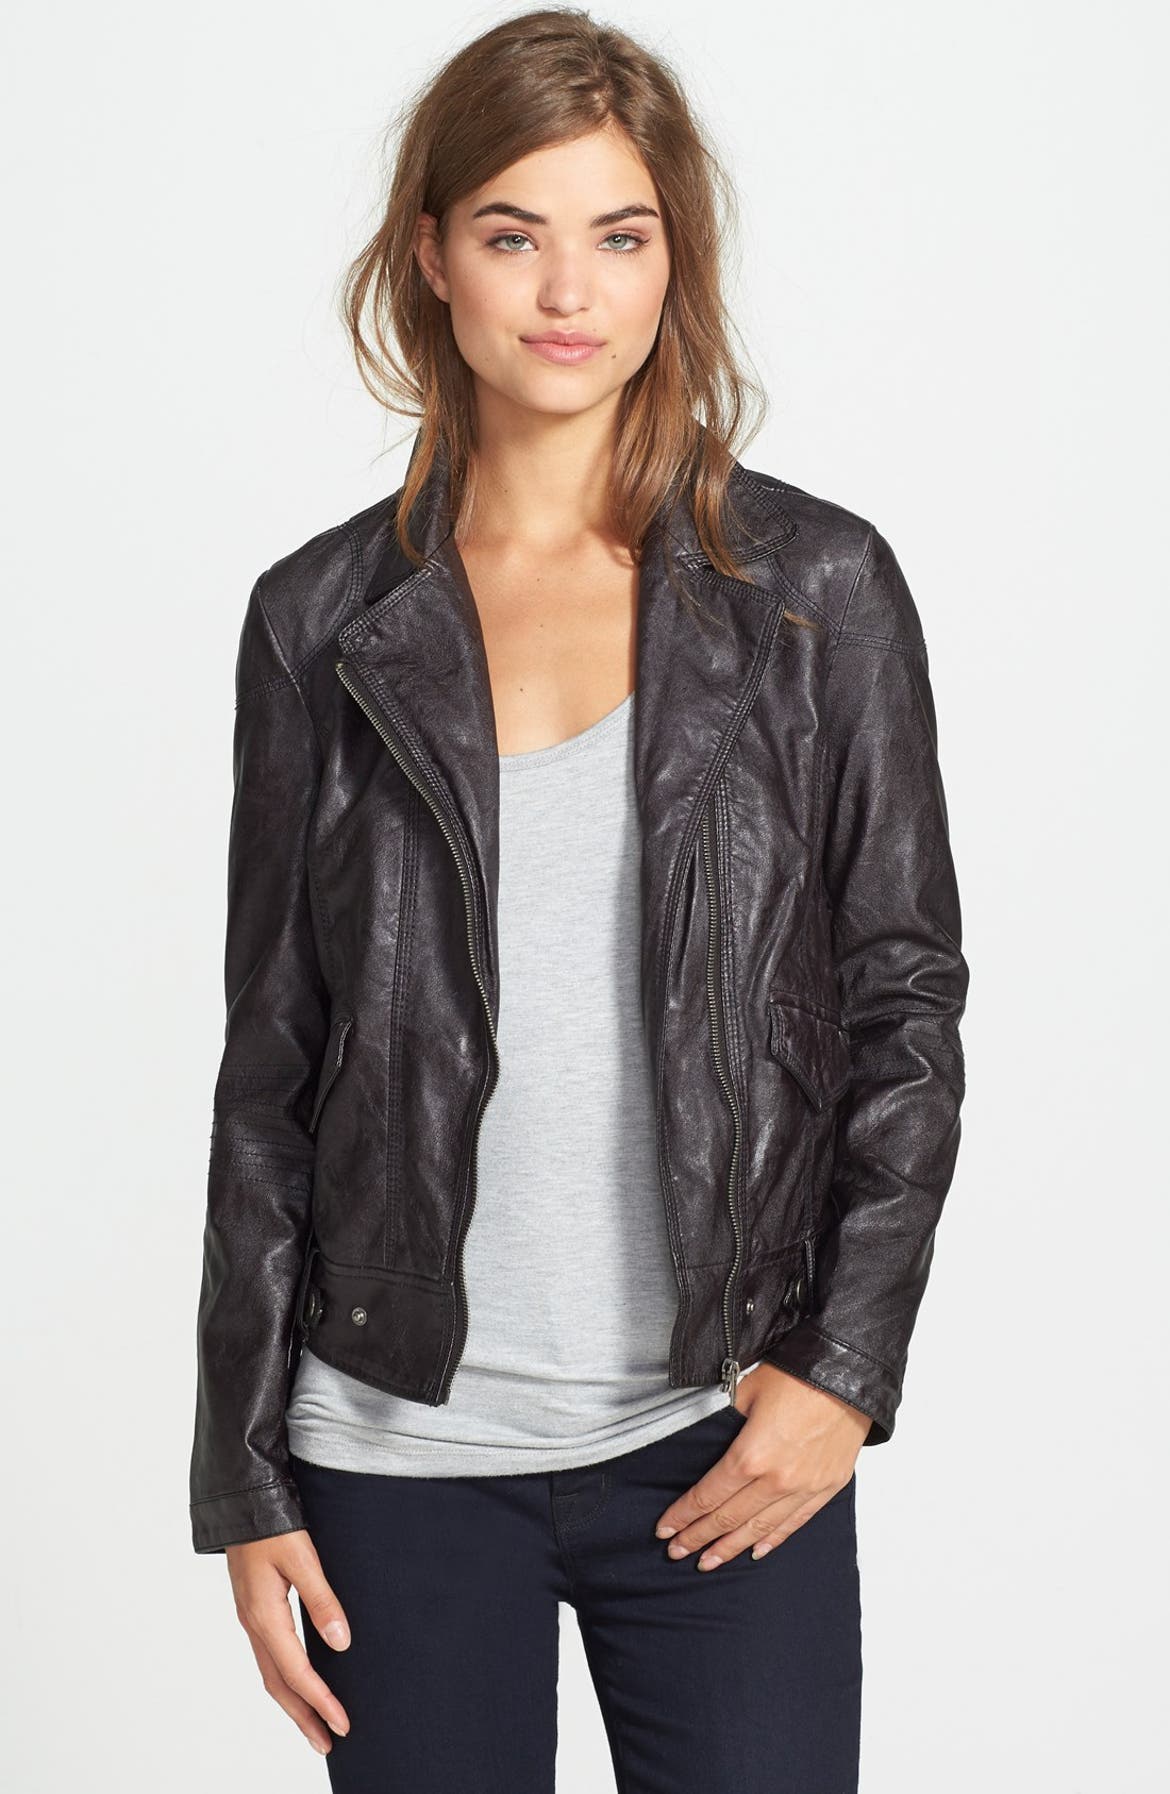 KUT from the Kloth 'Dean' Distressed Faux Leather Jacket | Nordstrom